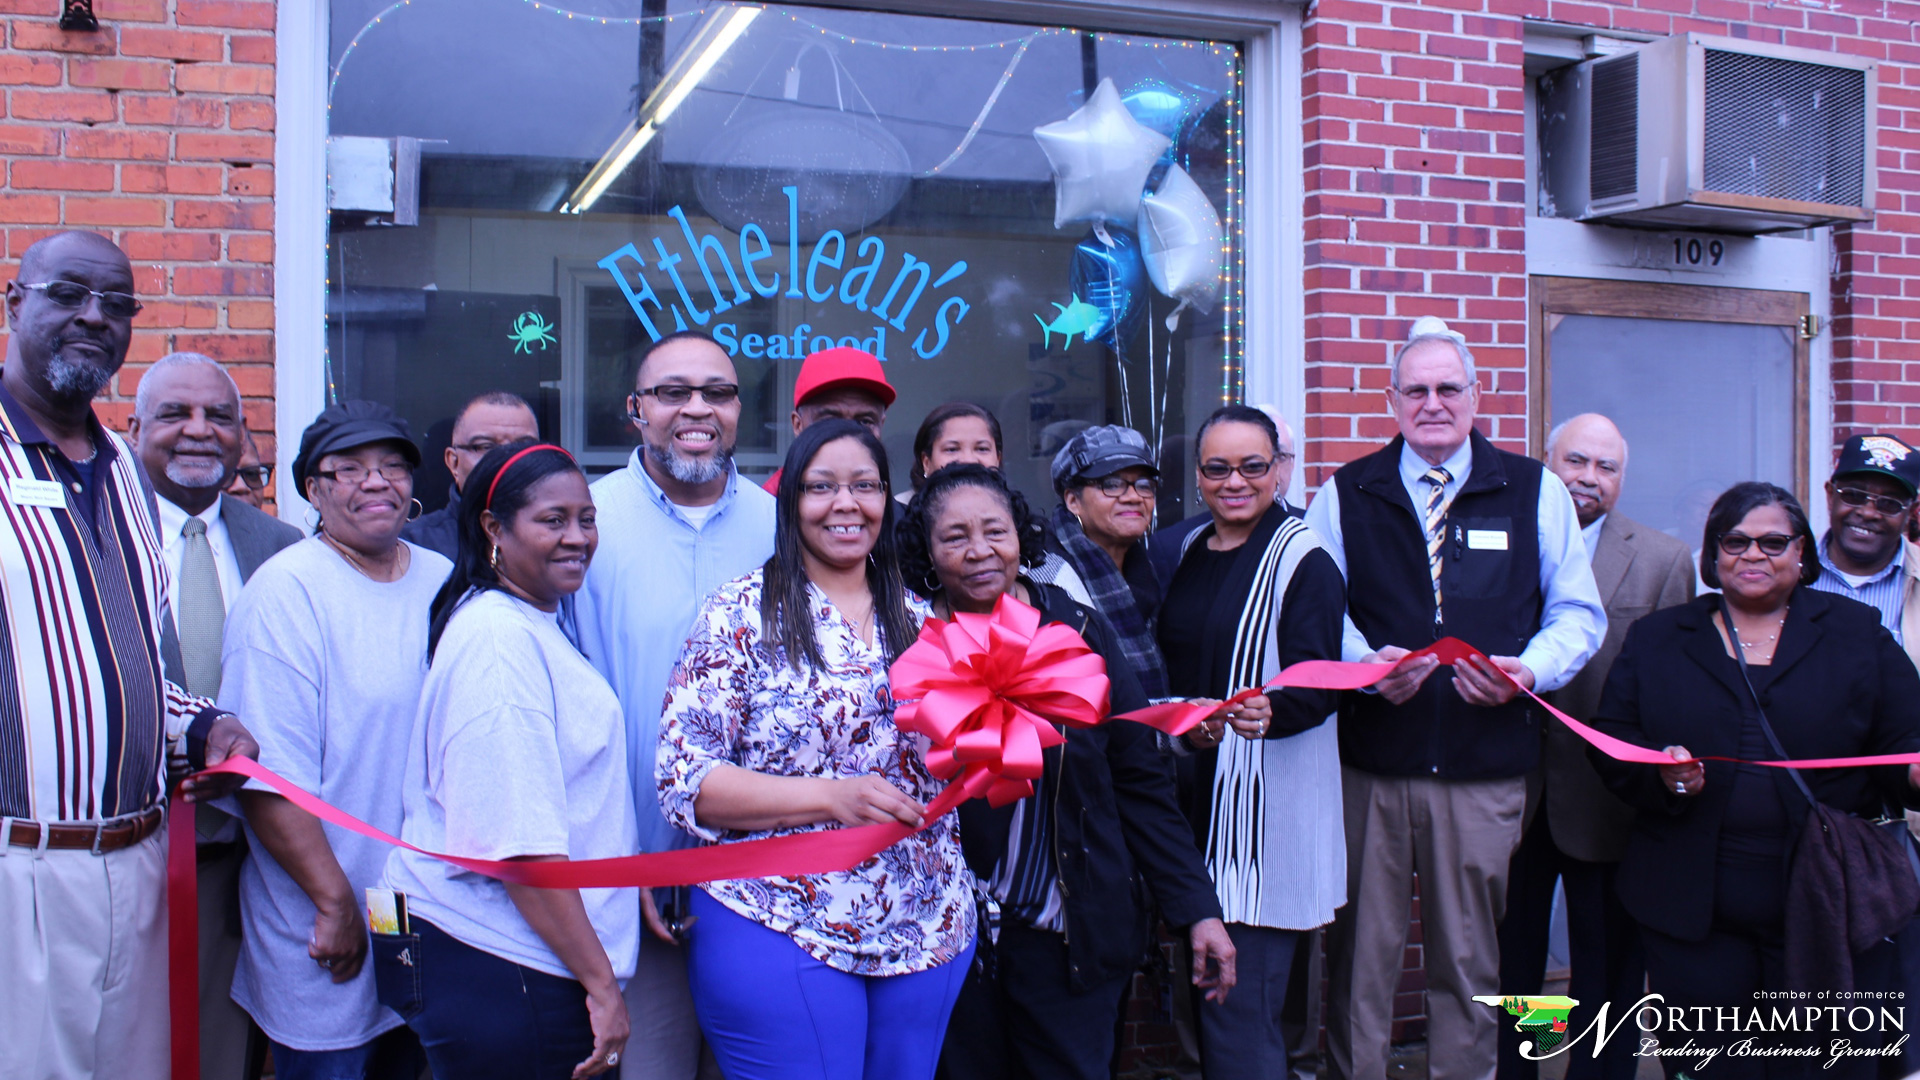 Ethelean’s Seafood Rich Square Ribbon Cutting took place on January 13, 2020